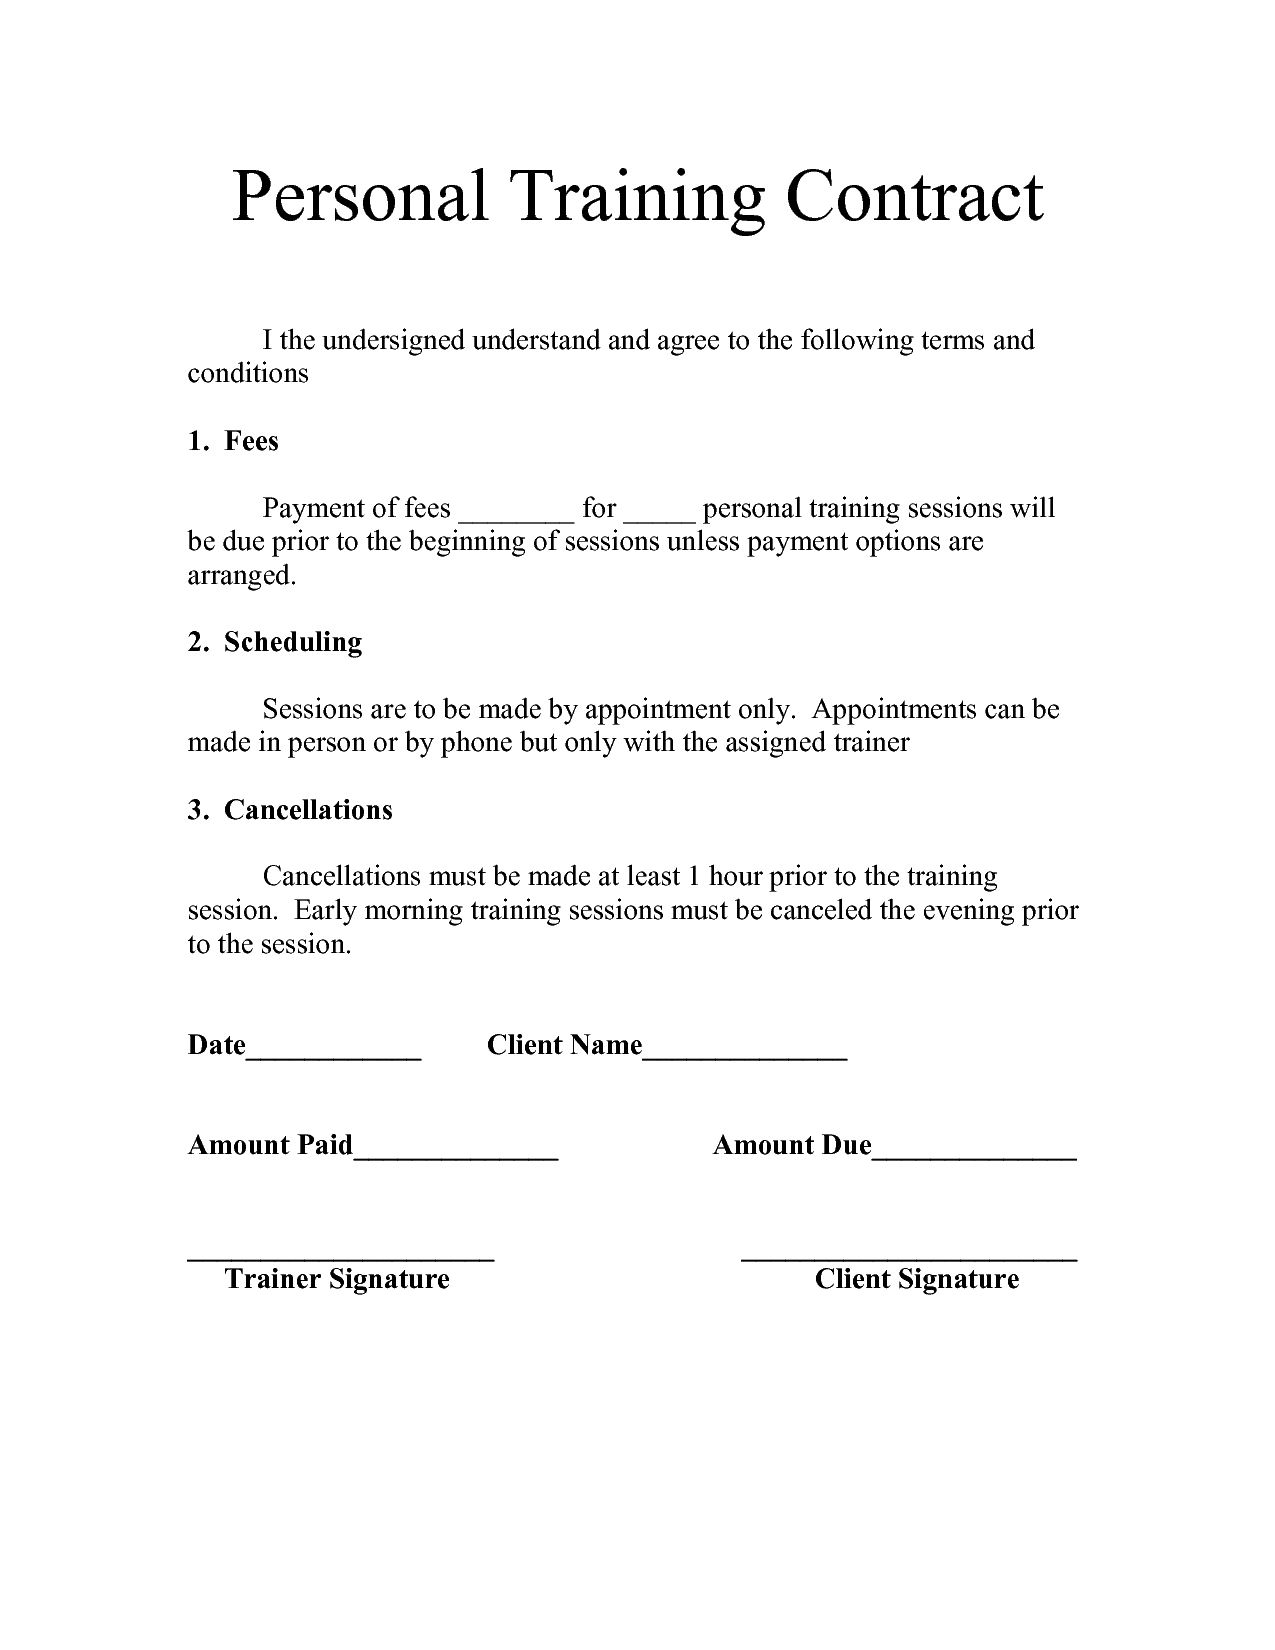 Personal Training Contract Templates  Five  Fitness  Personal throughout Personal Training Cancellation Policy Template